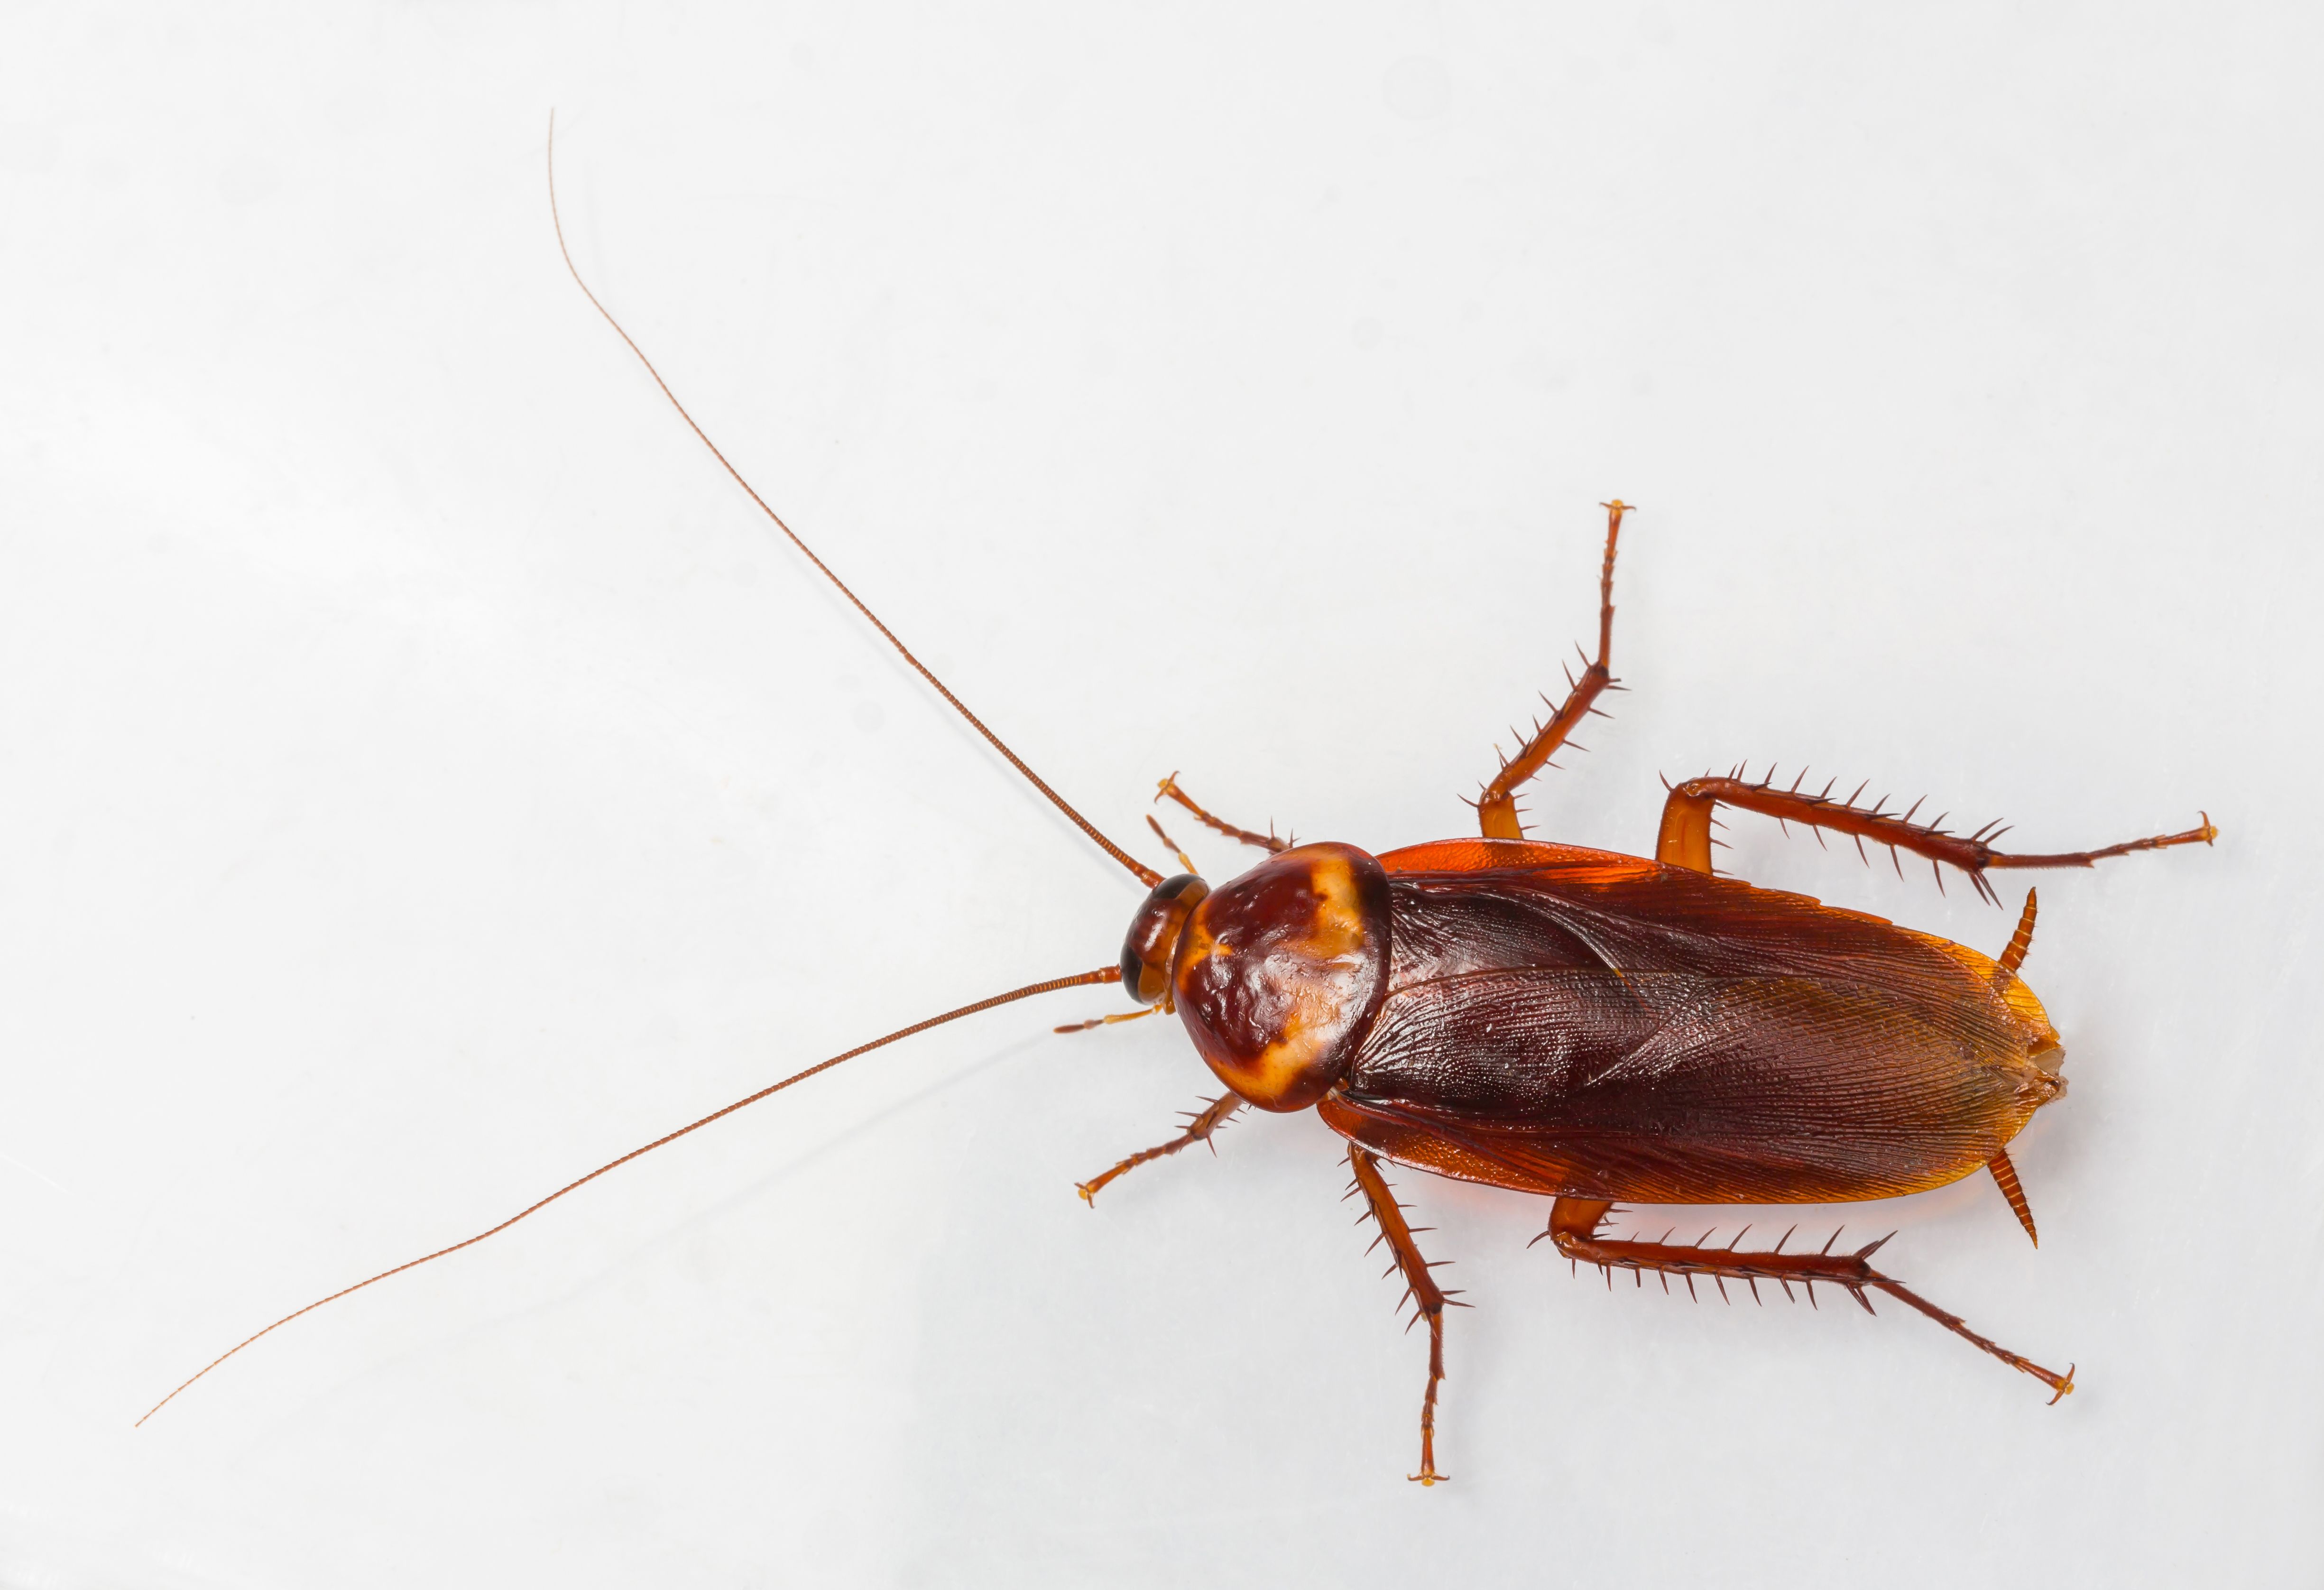 5 Common Types of Cockroaches That Can End Up in Your Home